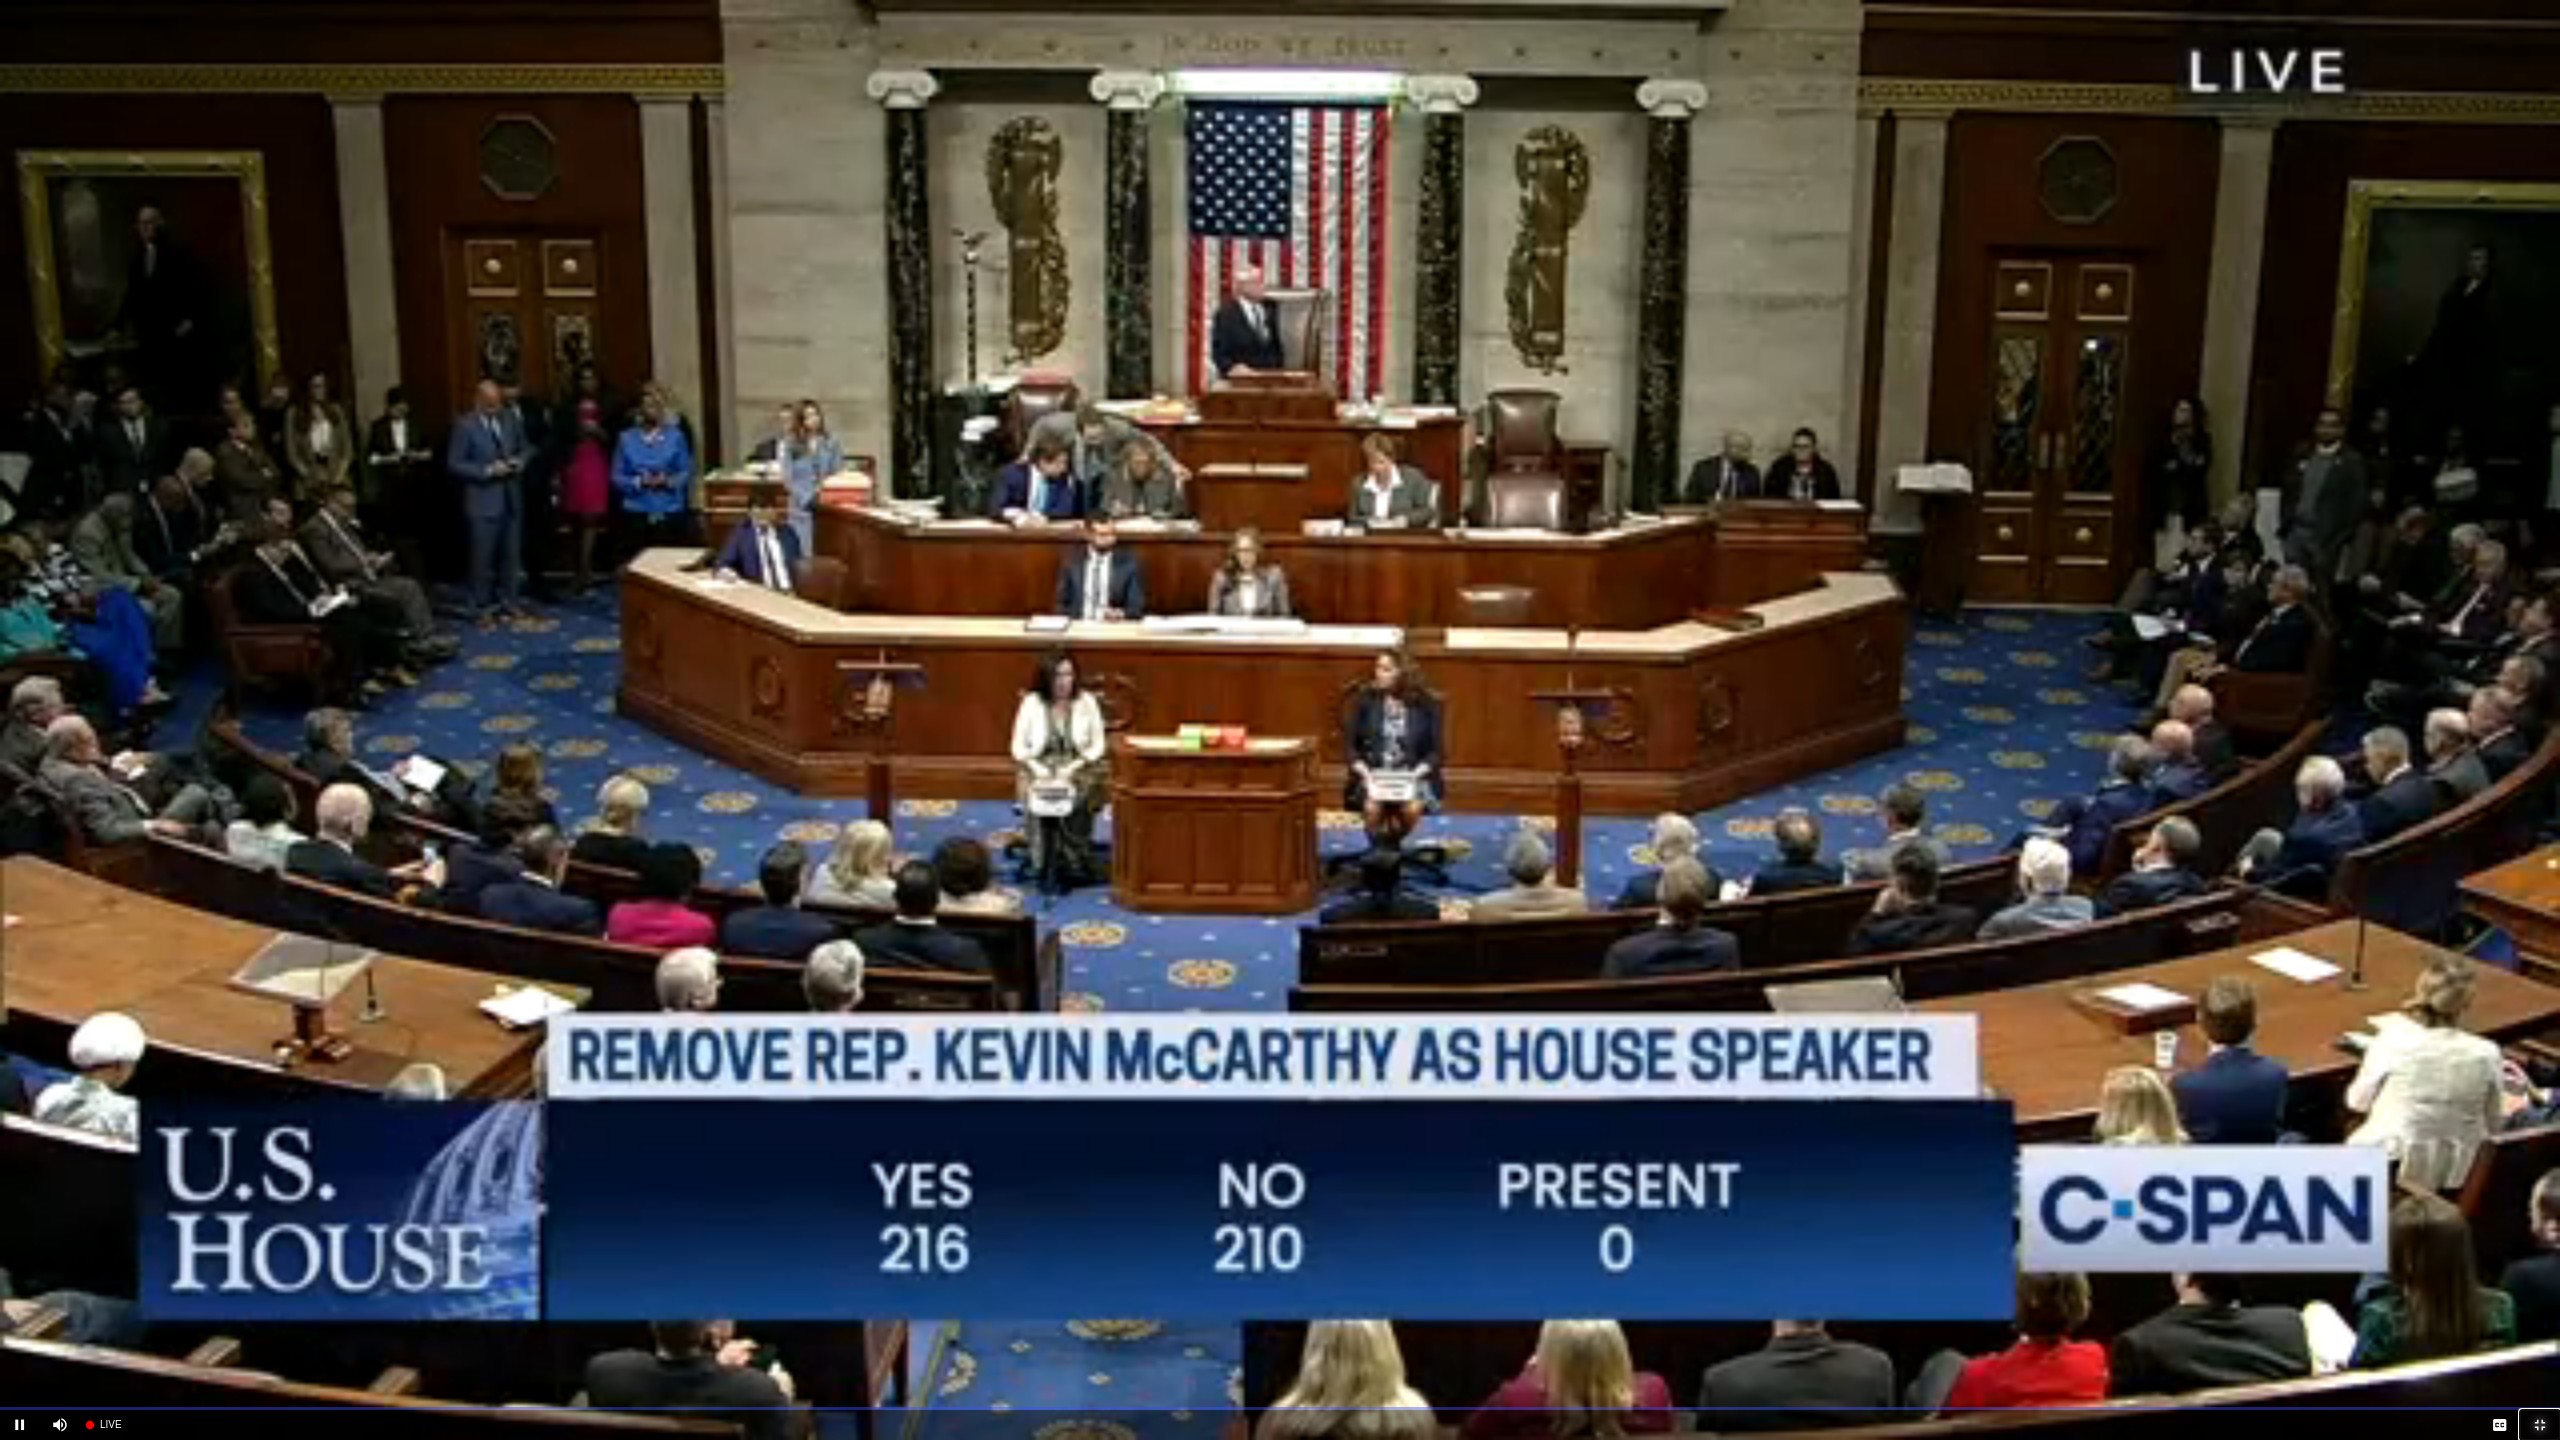 U.S. House voting to remove Kevin McCarthy as Speaker